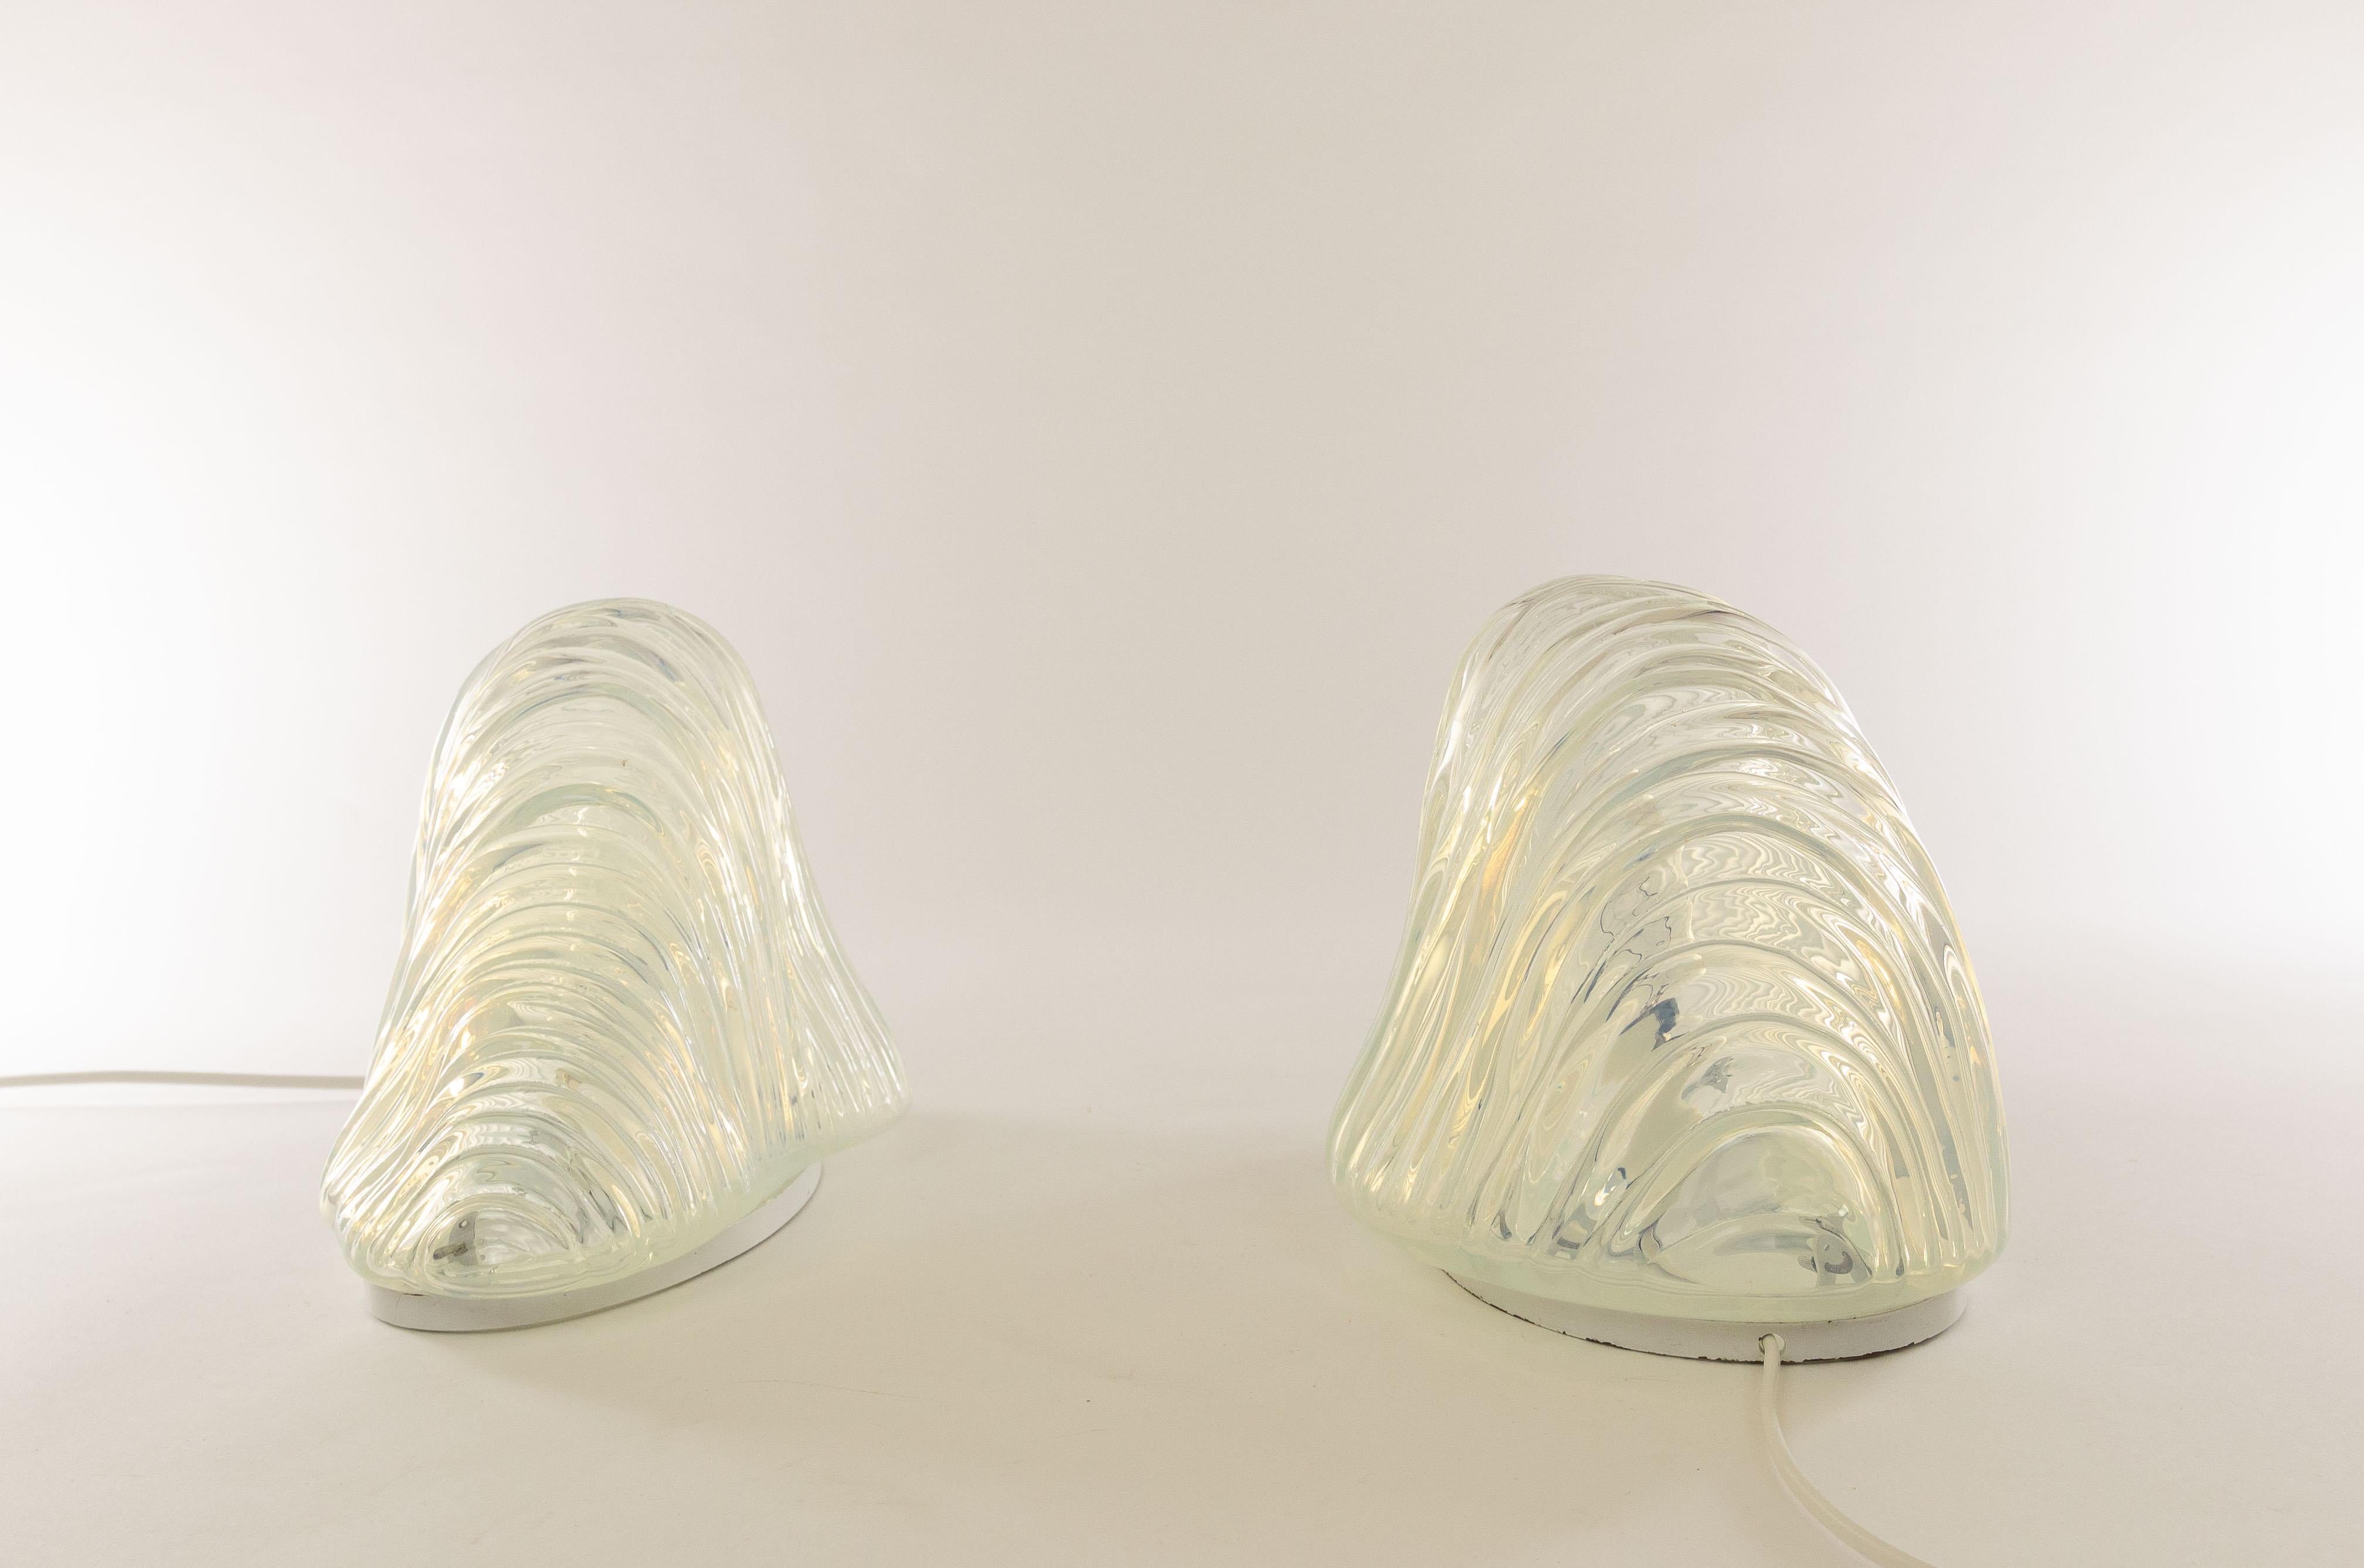 Mid-Century Modern Pair of Iceberg Table Lamps by Carlo Nason for A.V. Mazzega, 1960s